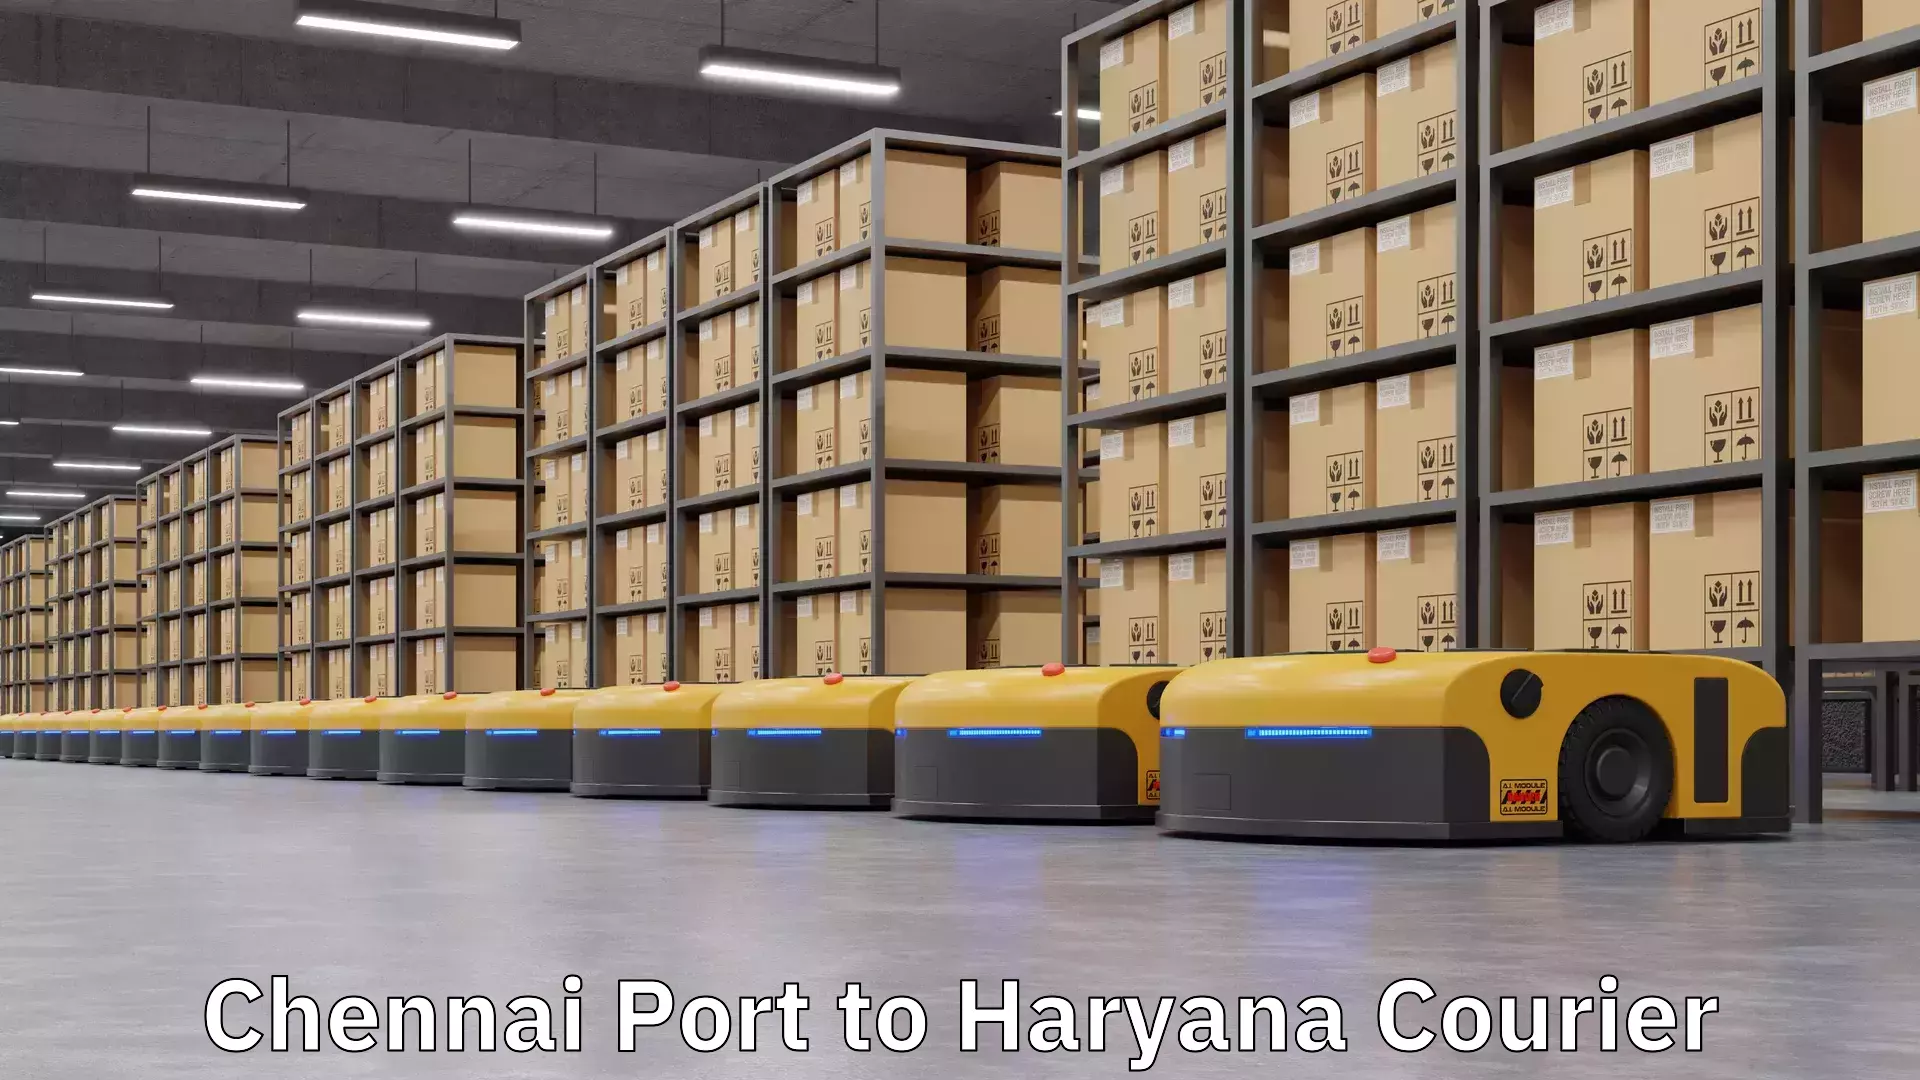 State-of-the-art courier technology Chennai Port to Haryana